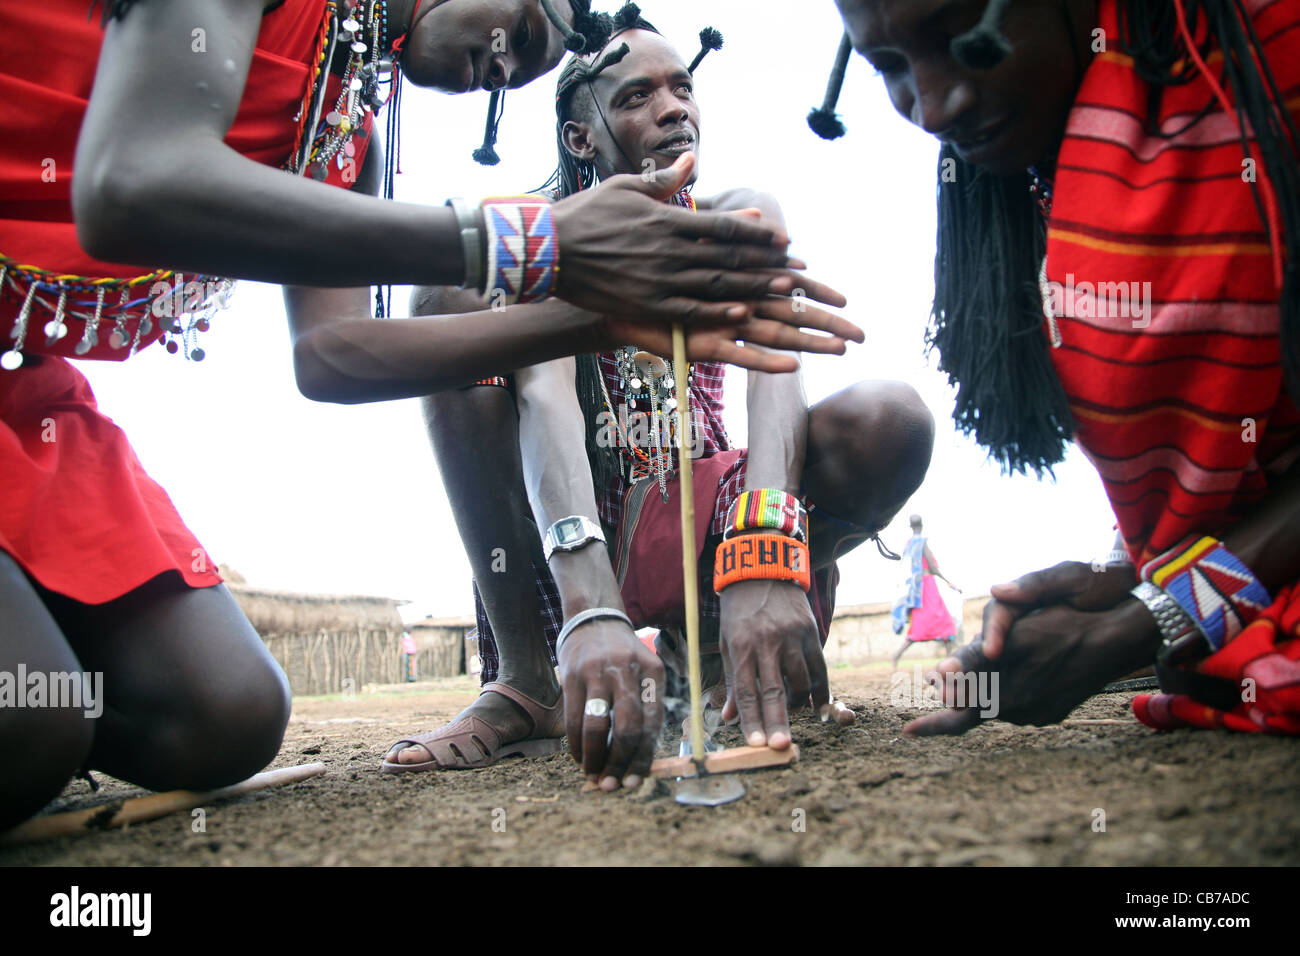 Young Masai men start a friction fire by rubbing two sticks together at their village in the Masai Mara National Reserve, Kenya. 2/2/2009. Photograph: Stock Photo